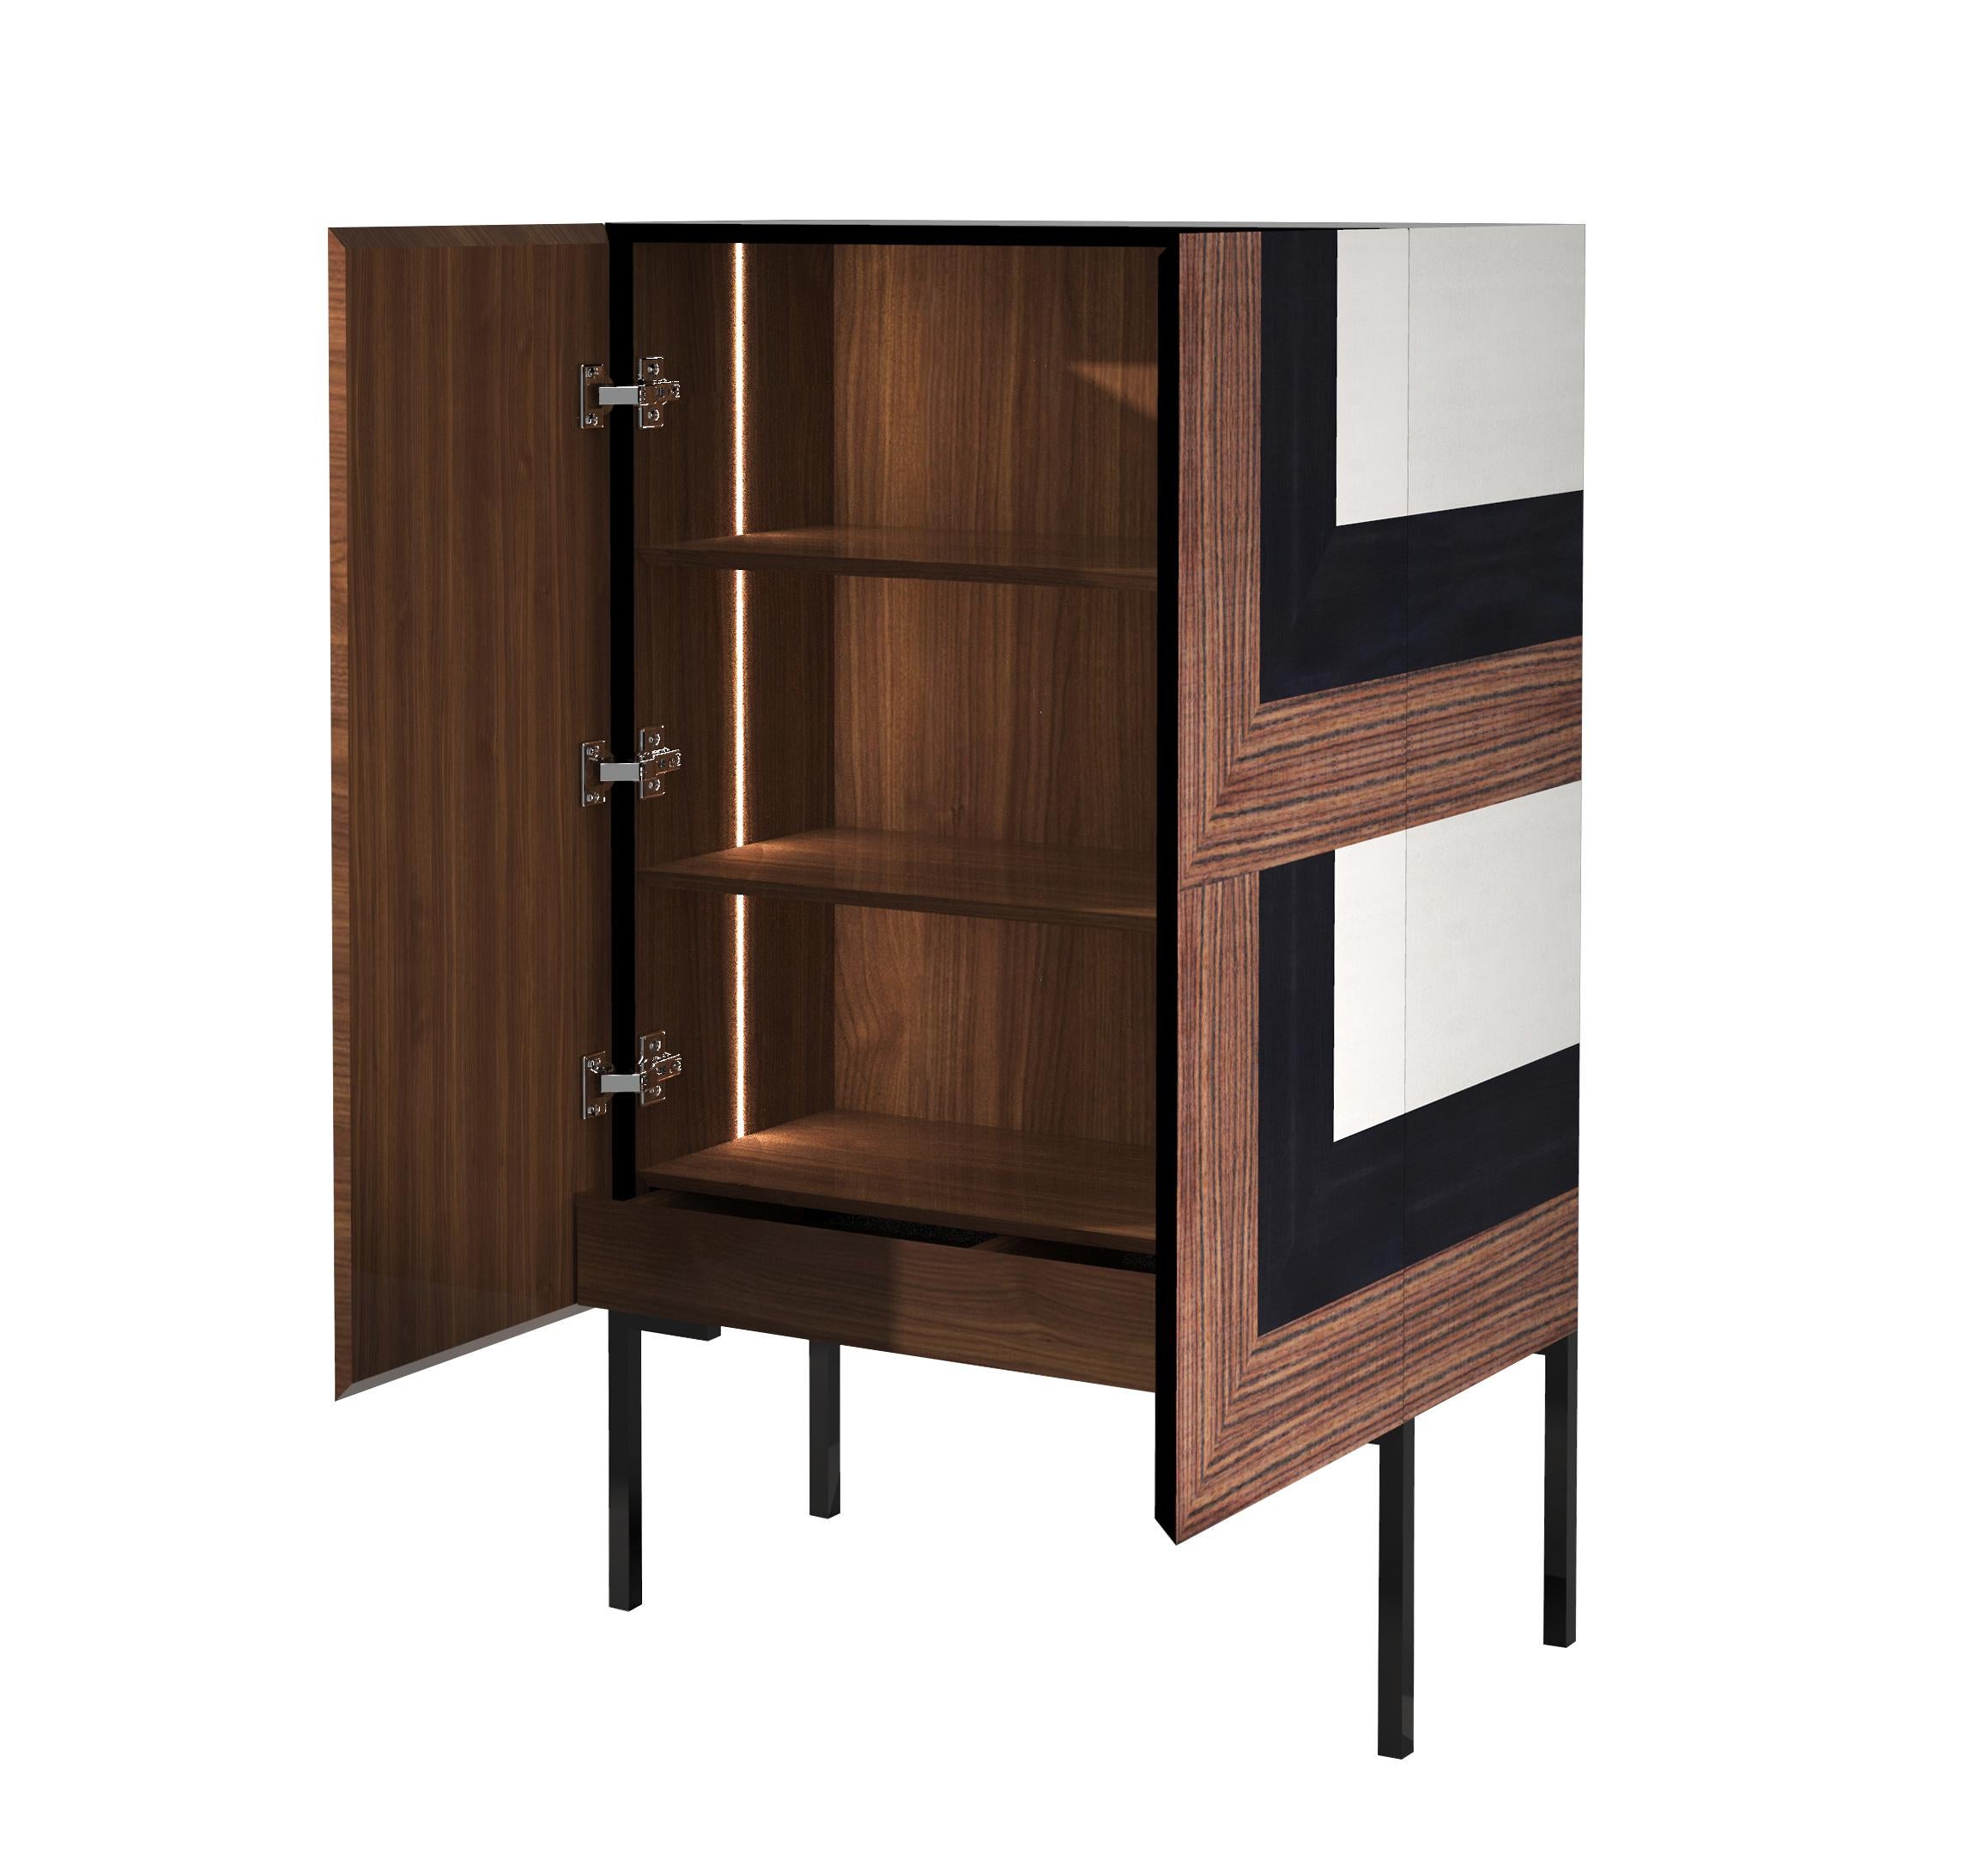 Combined by Hebanon's master cabinet-makers, the woods are skilfully juxtaposed to design a refined optical inlay.

The frontal perspective illusion is reinforced by the 45° cut of the doors and structure that allows the precious woods to be